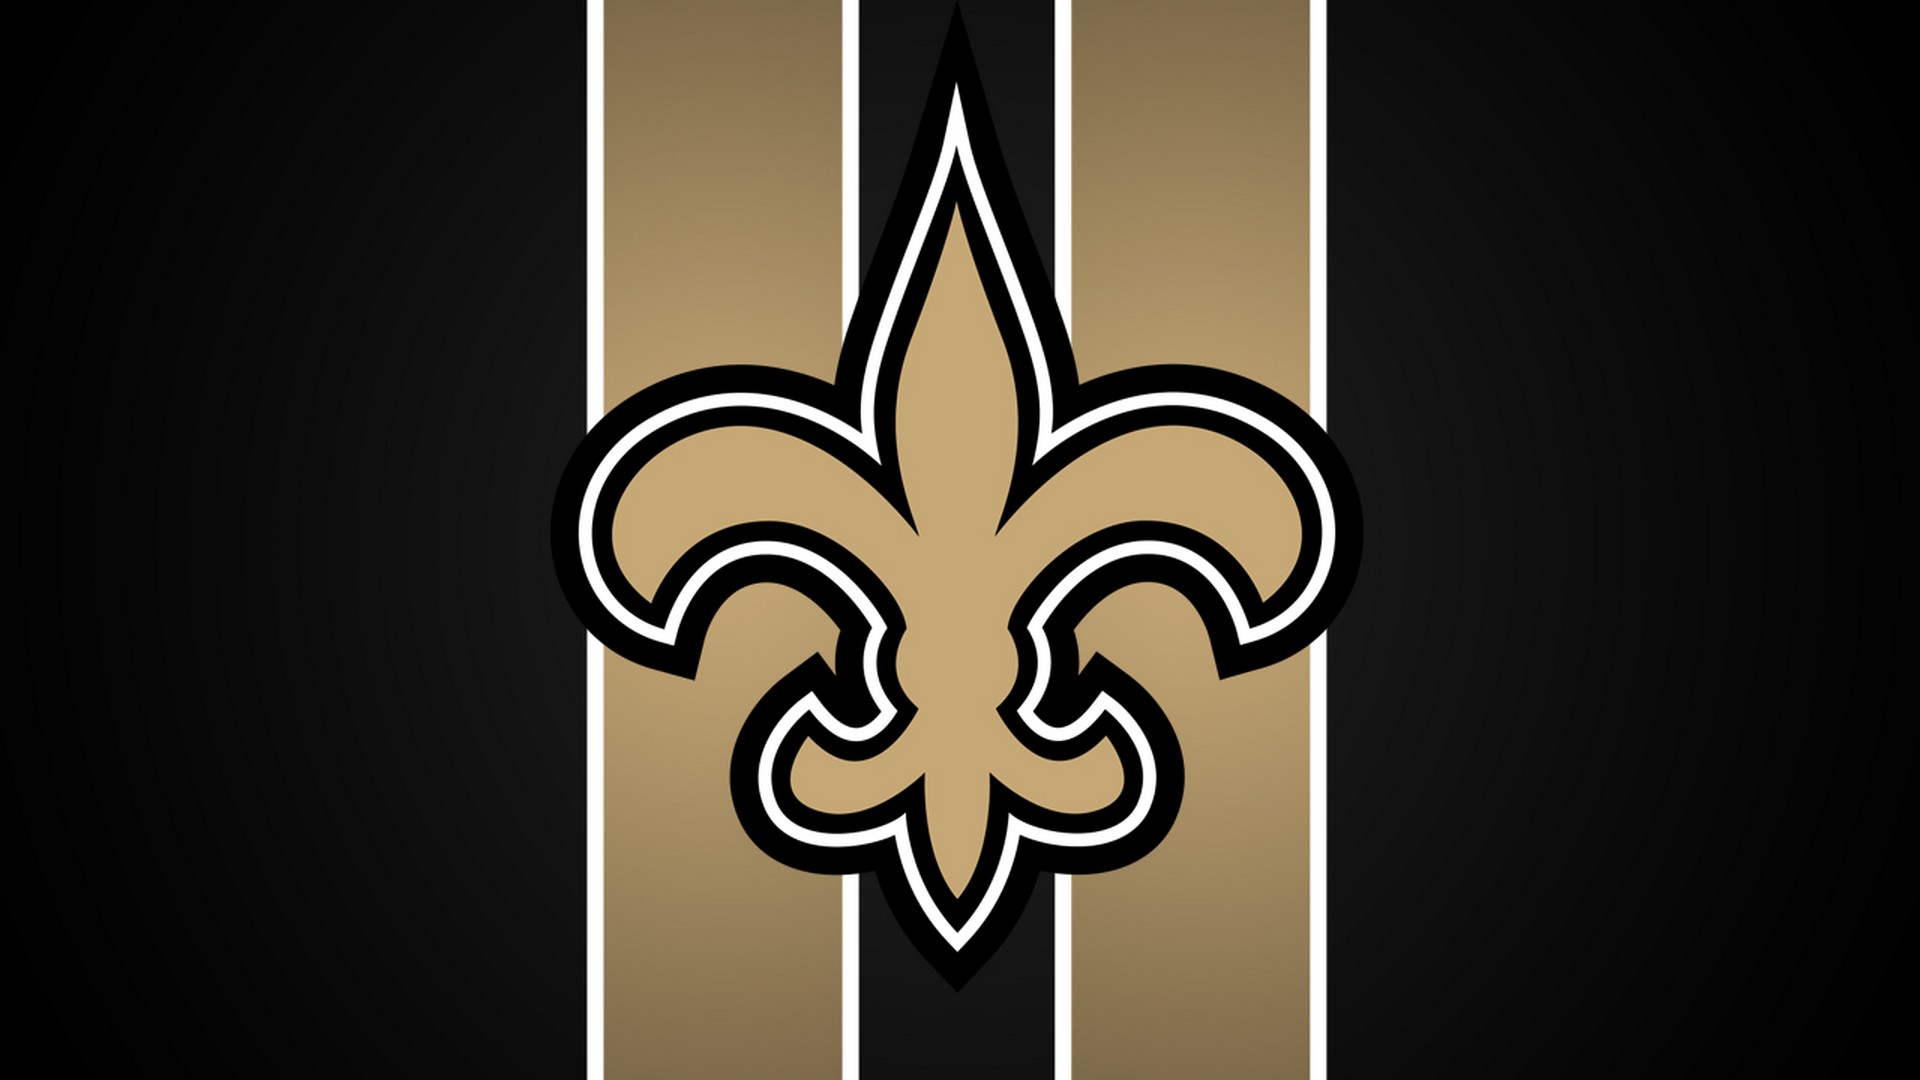 Hd Backgrounds New Orleans Saints Nfl With Resolution - New Orleans Saints - HD Wallpaper 